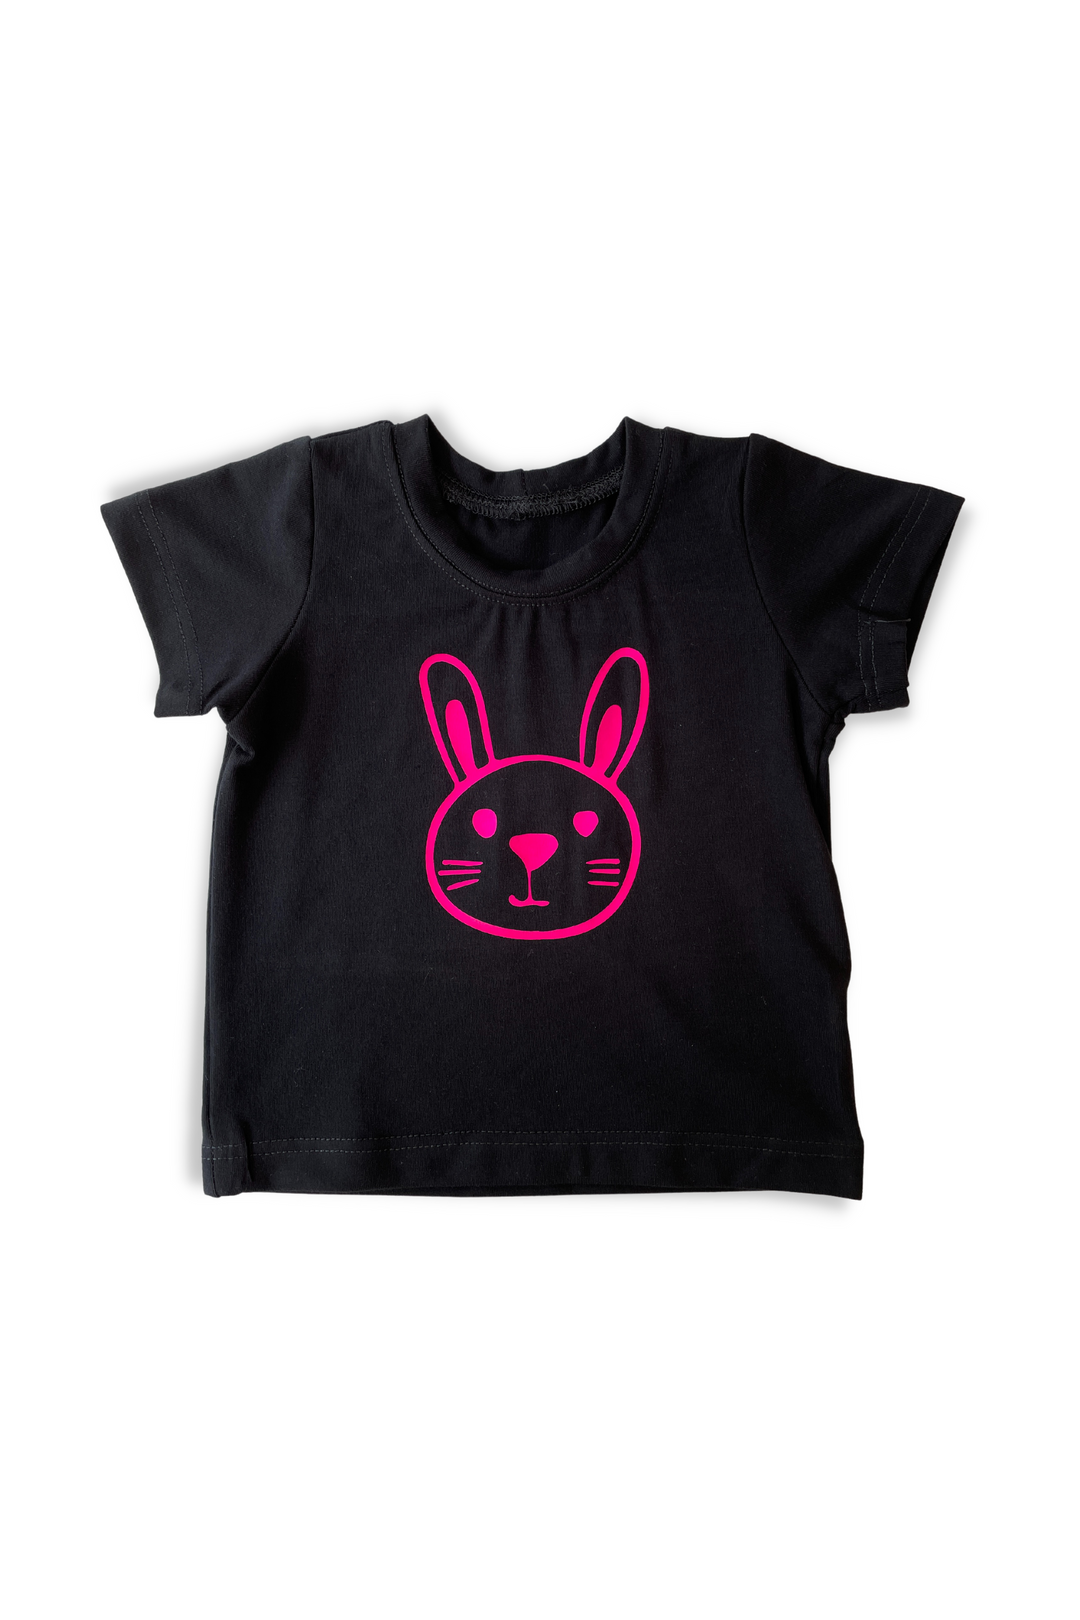 Baby t-shirt - Luc the bunny - Black